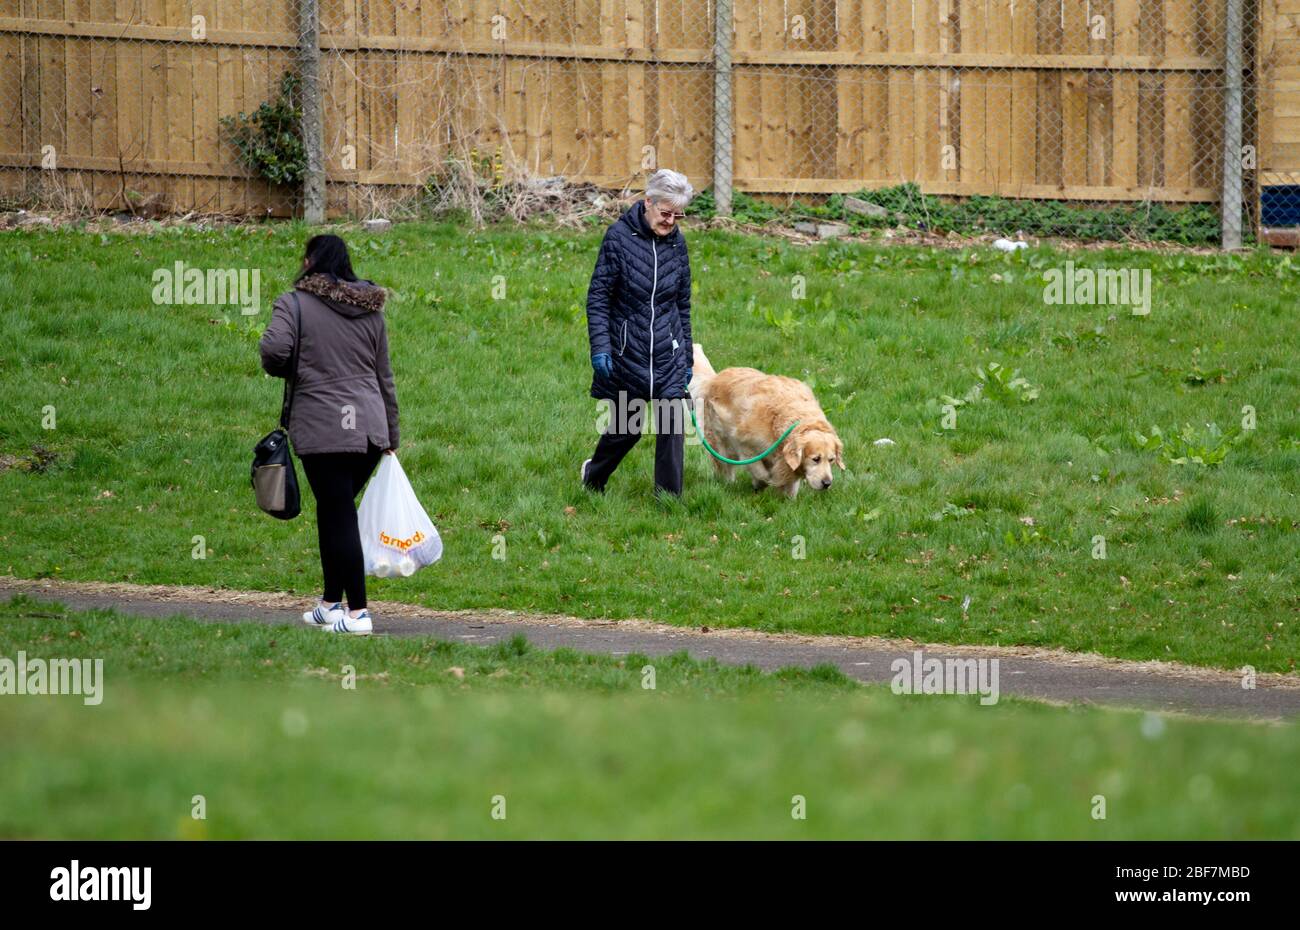 Dundee, Tayside, Scotland, UK. 17th Apr, 2020. UK Weather: A quiet Ardler Village in Dundee while people respecting the social distancing guidelines as they exercise on a cold windy day as the governments lockdown restrictions continue throughout the UK. Credit: Dundee Photographics/Alamy Live News Stock Photo